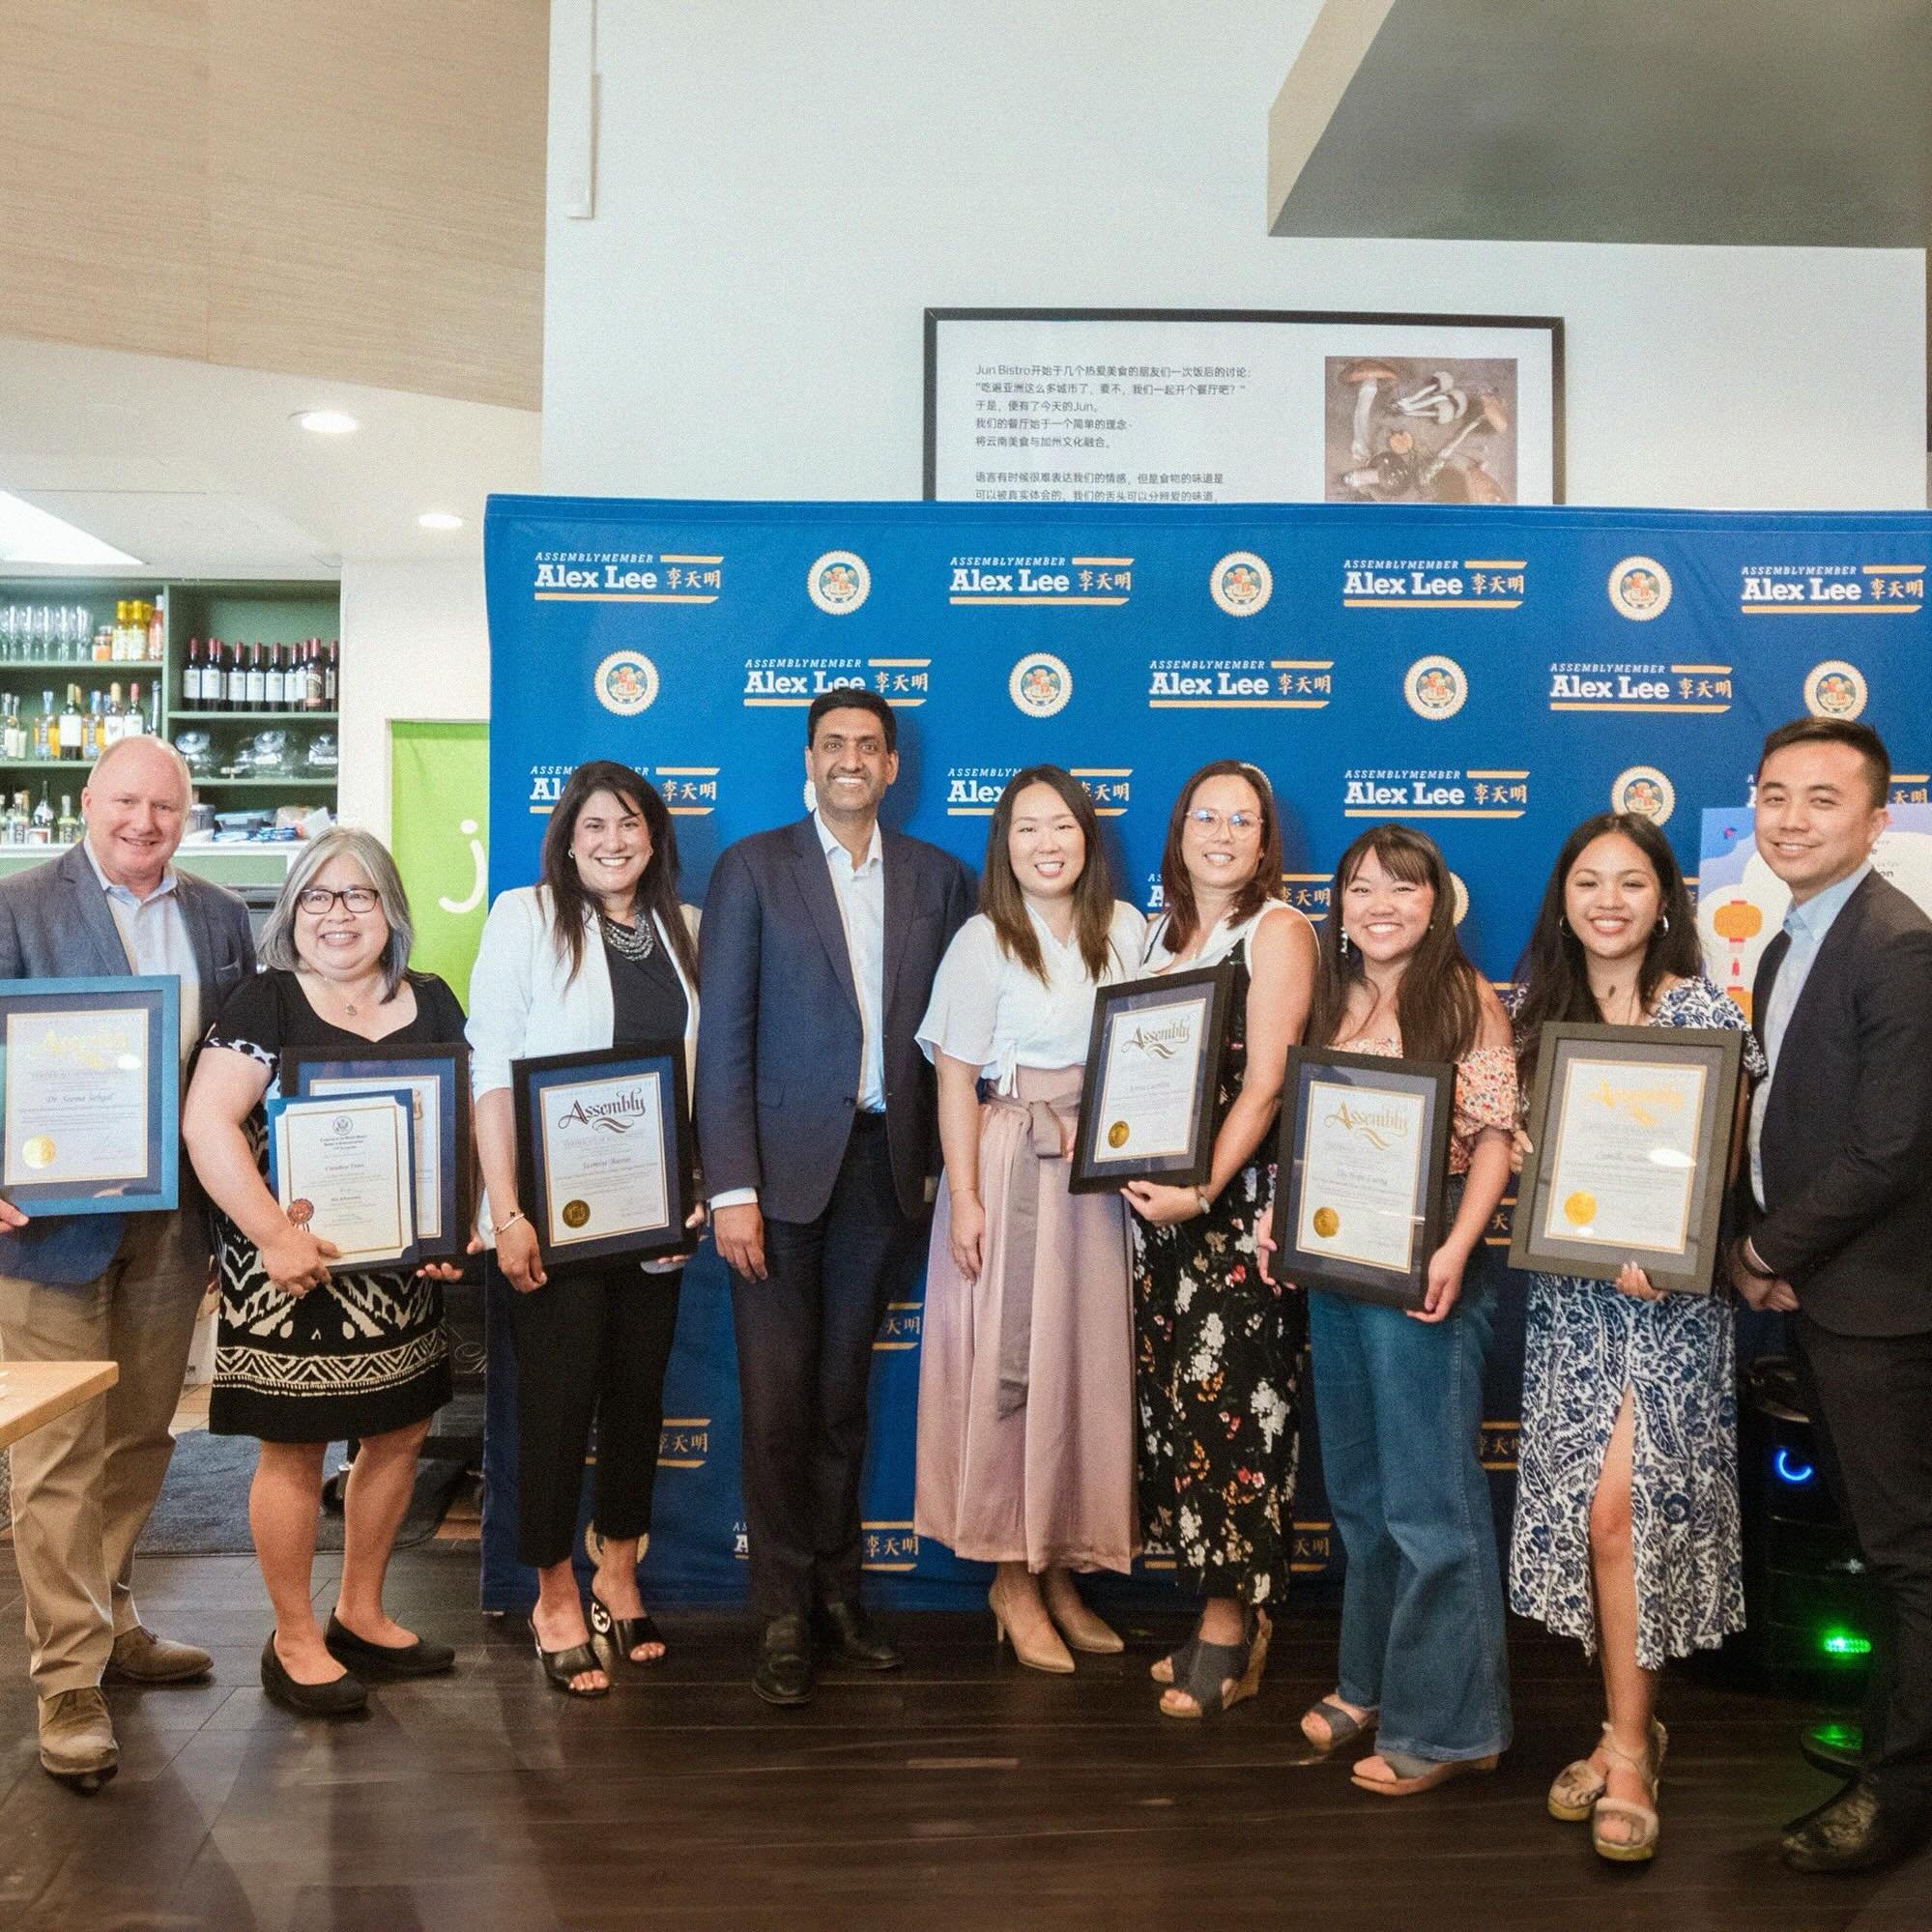 Yesterday, In observance of AAPI History Month, Rep Ro Khanna and Assemblymember Alex Lee took time to recognize some of the community&rsquo;s best and brightest! Congratulations to AANHPI Honorees, Thy Hope Luong (D4 Youth Commissioner), Librarian C